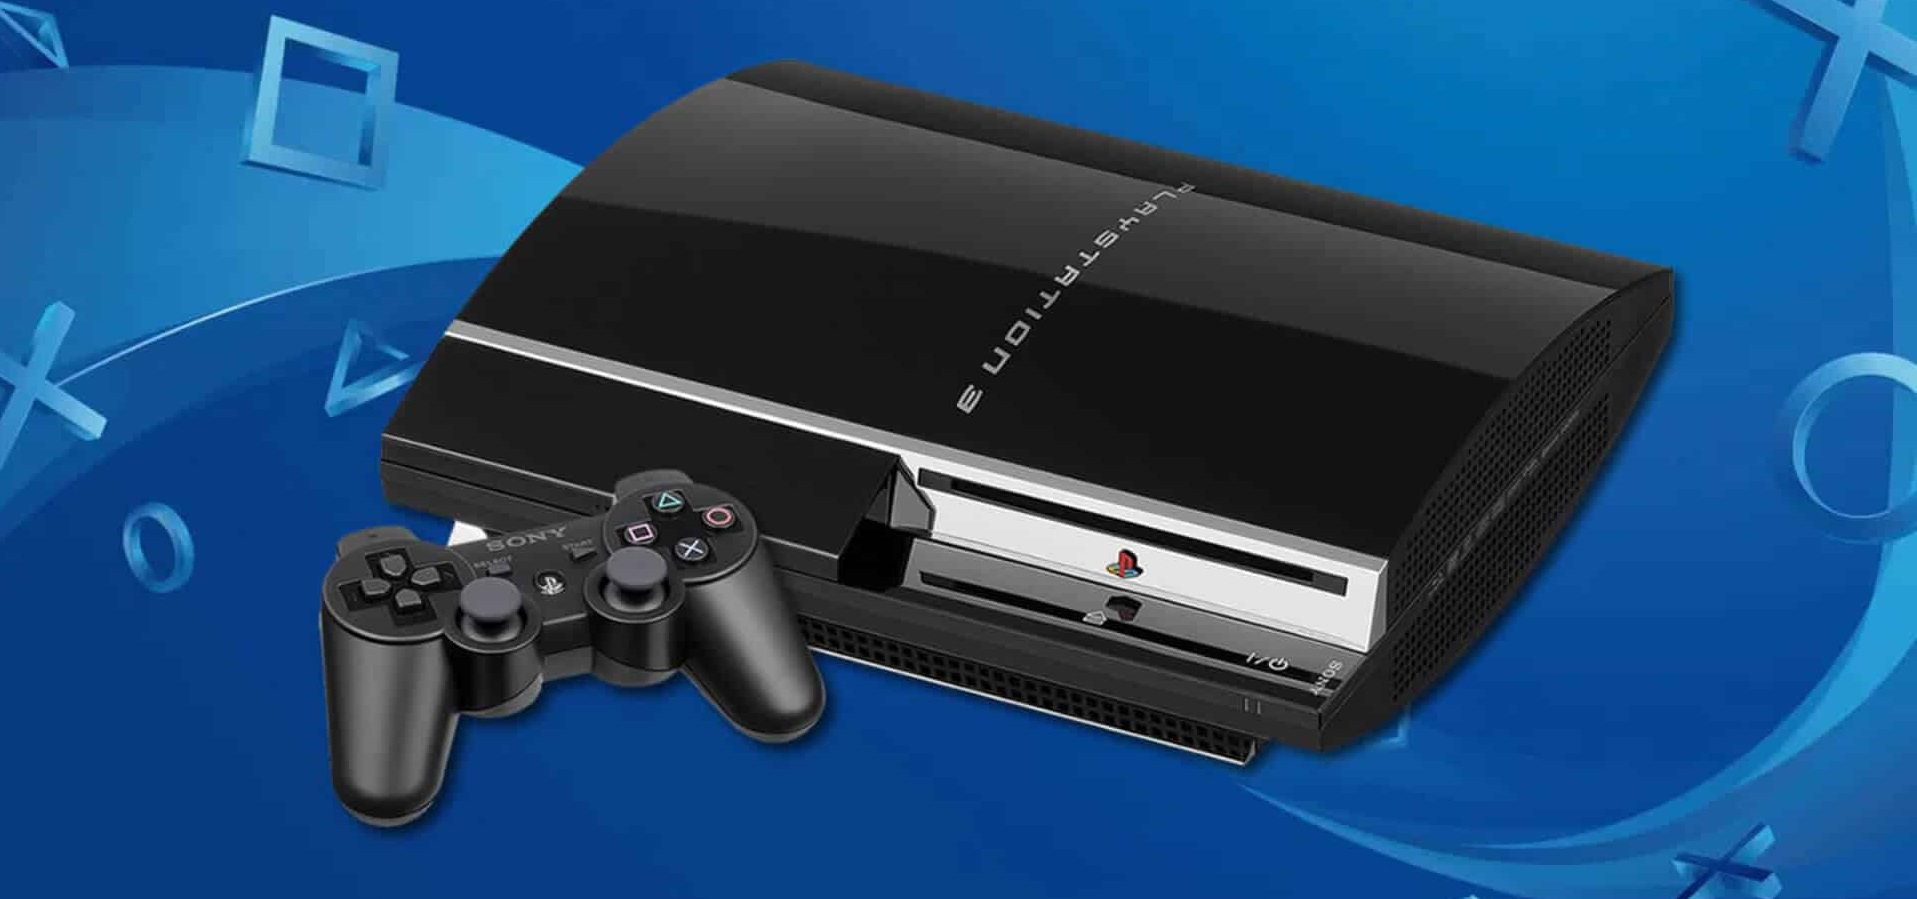 Where To Sell Playstation 3